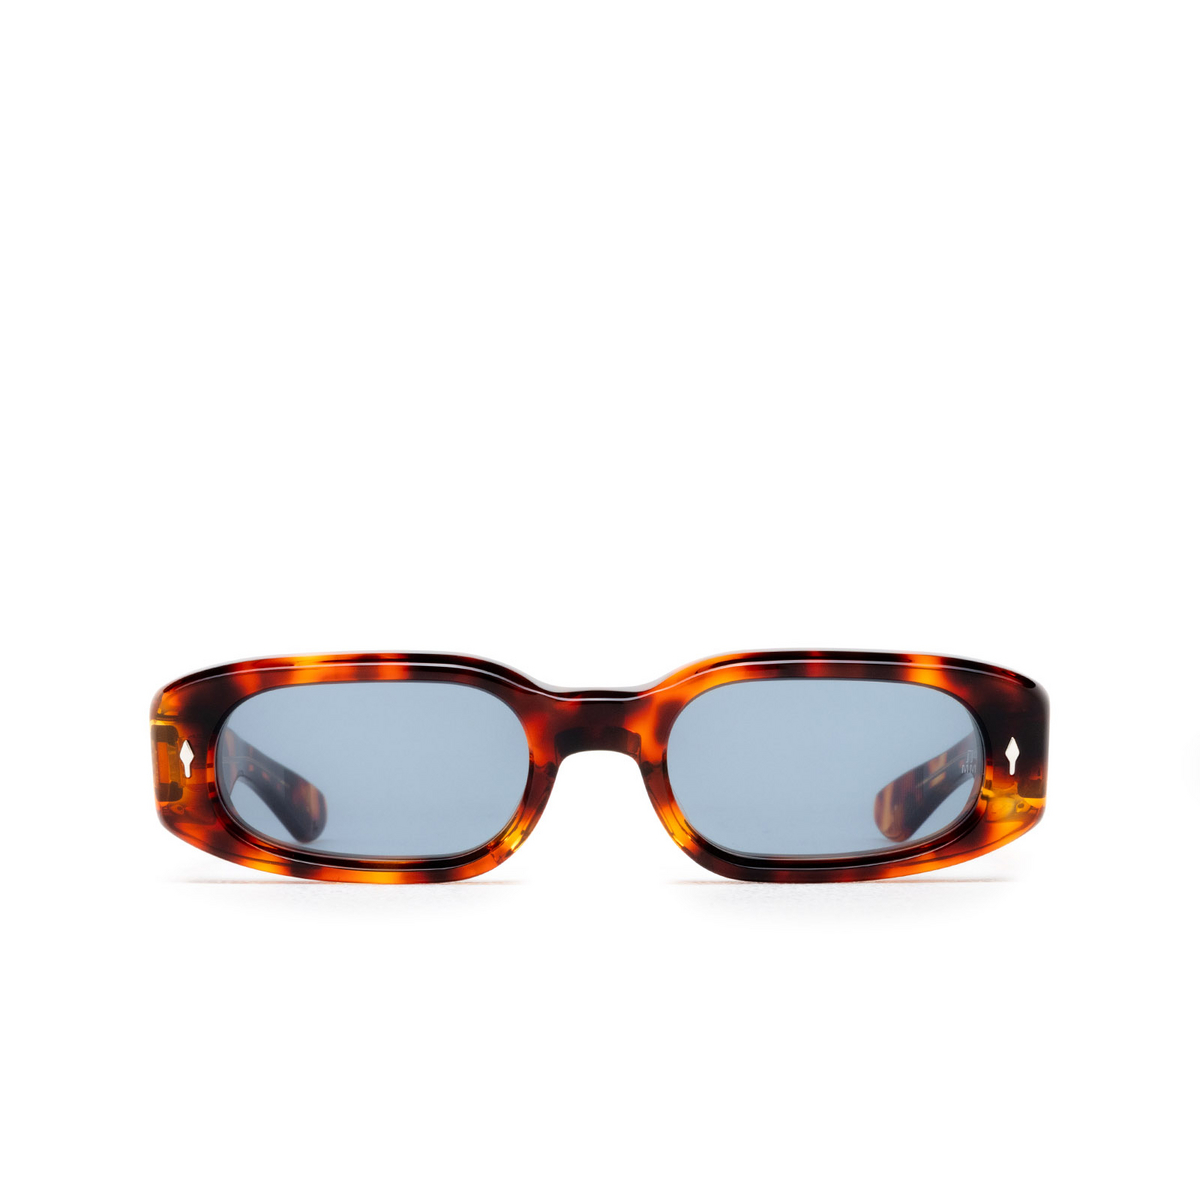 Jacques Marie Mage HULYA Sunglasses LEOPARD - front view